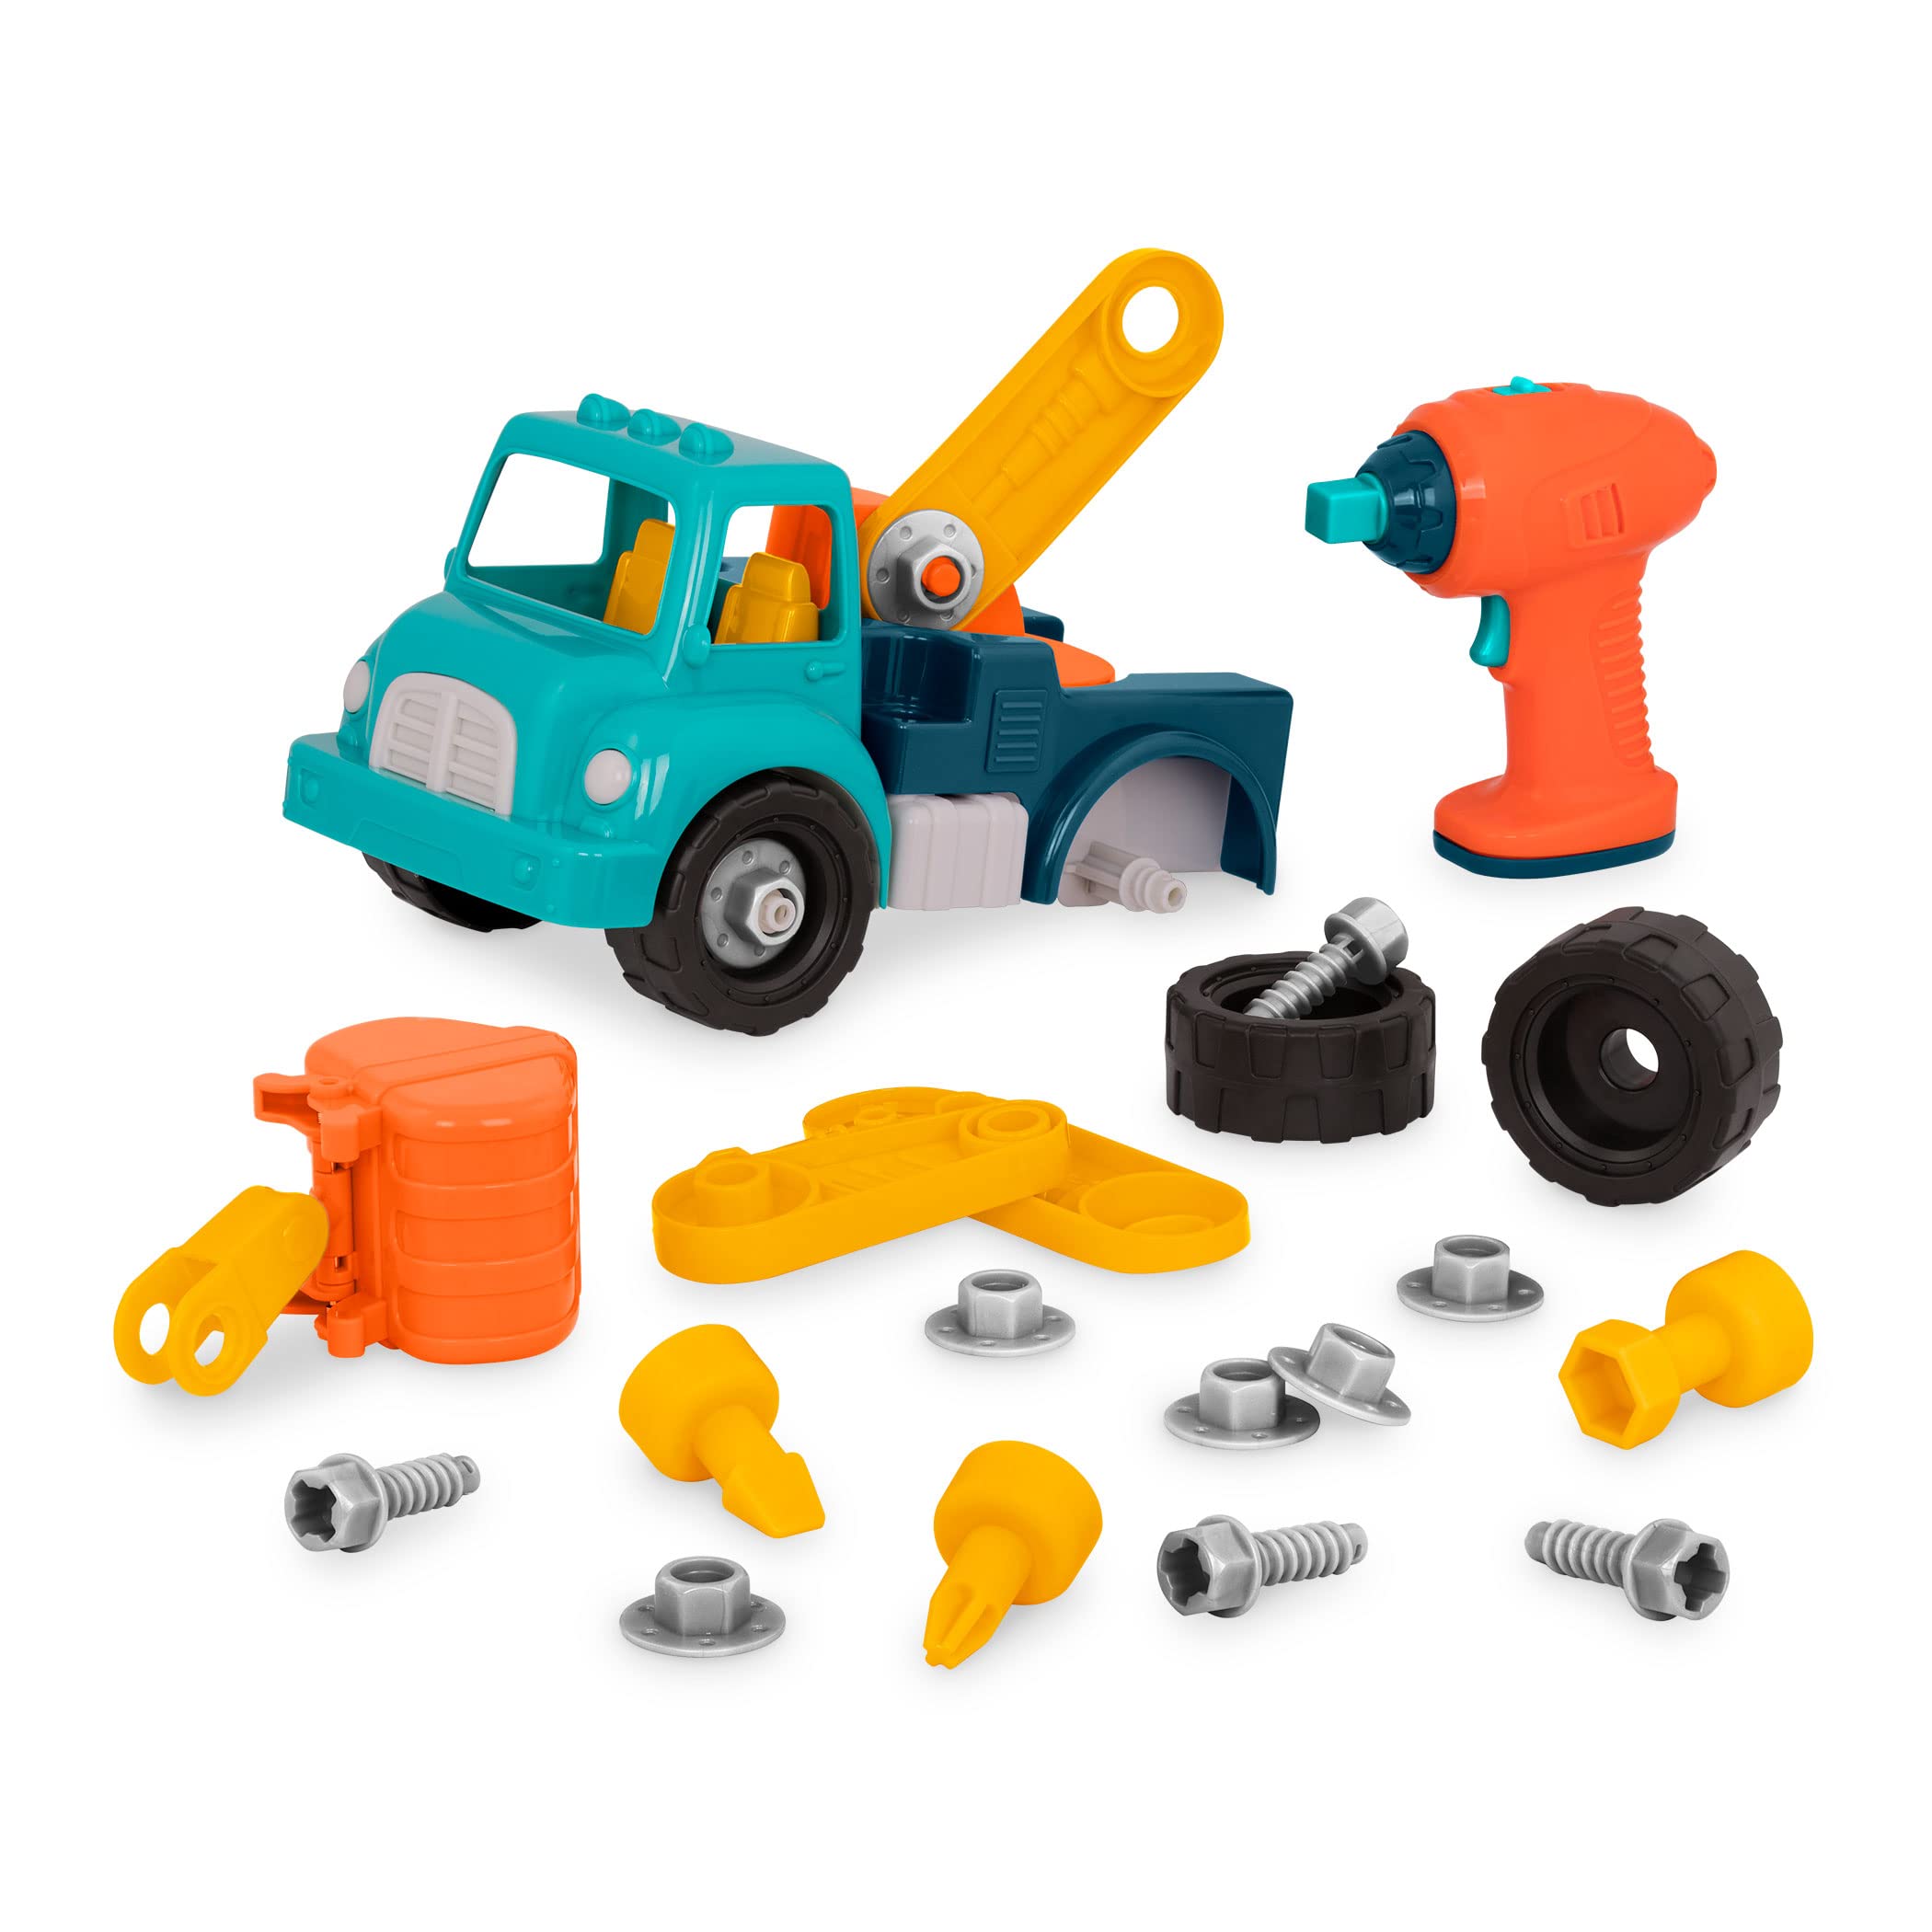 Battat - Take-Apart Crane – Take-Apart Toy Crane Truck with Toy Drill Building Toys for Kids 3 years + (33-Pcs) Dark Blue